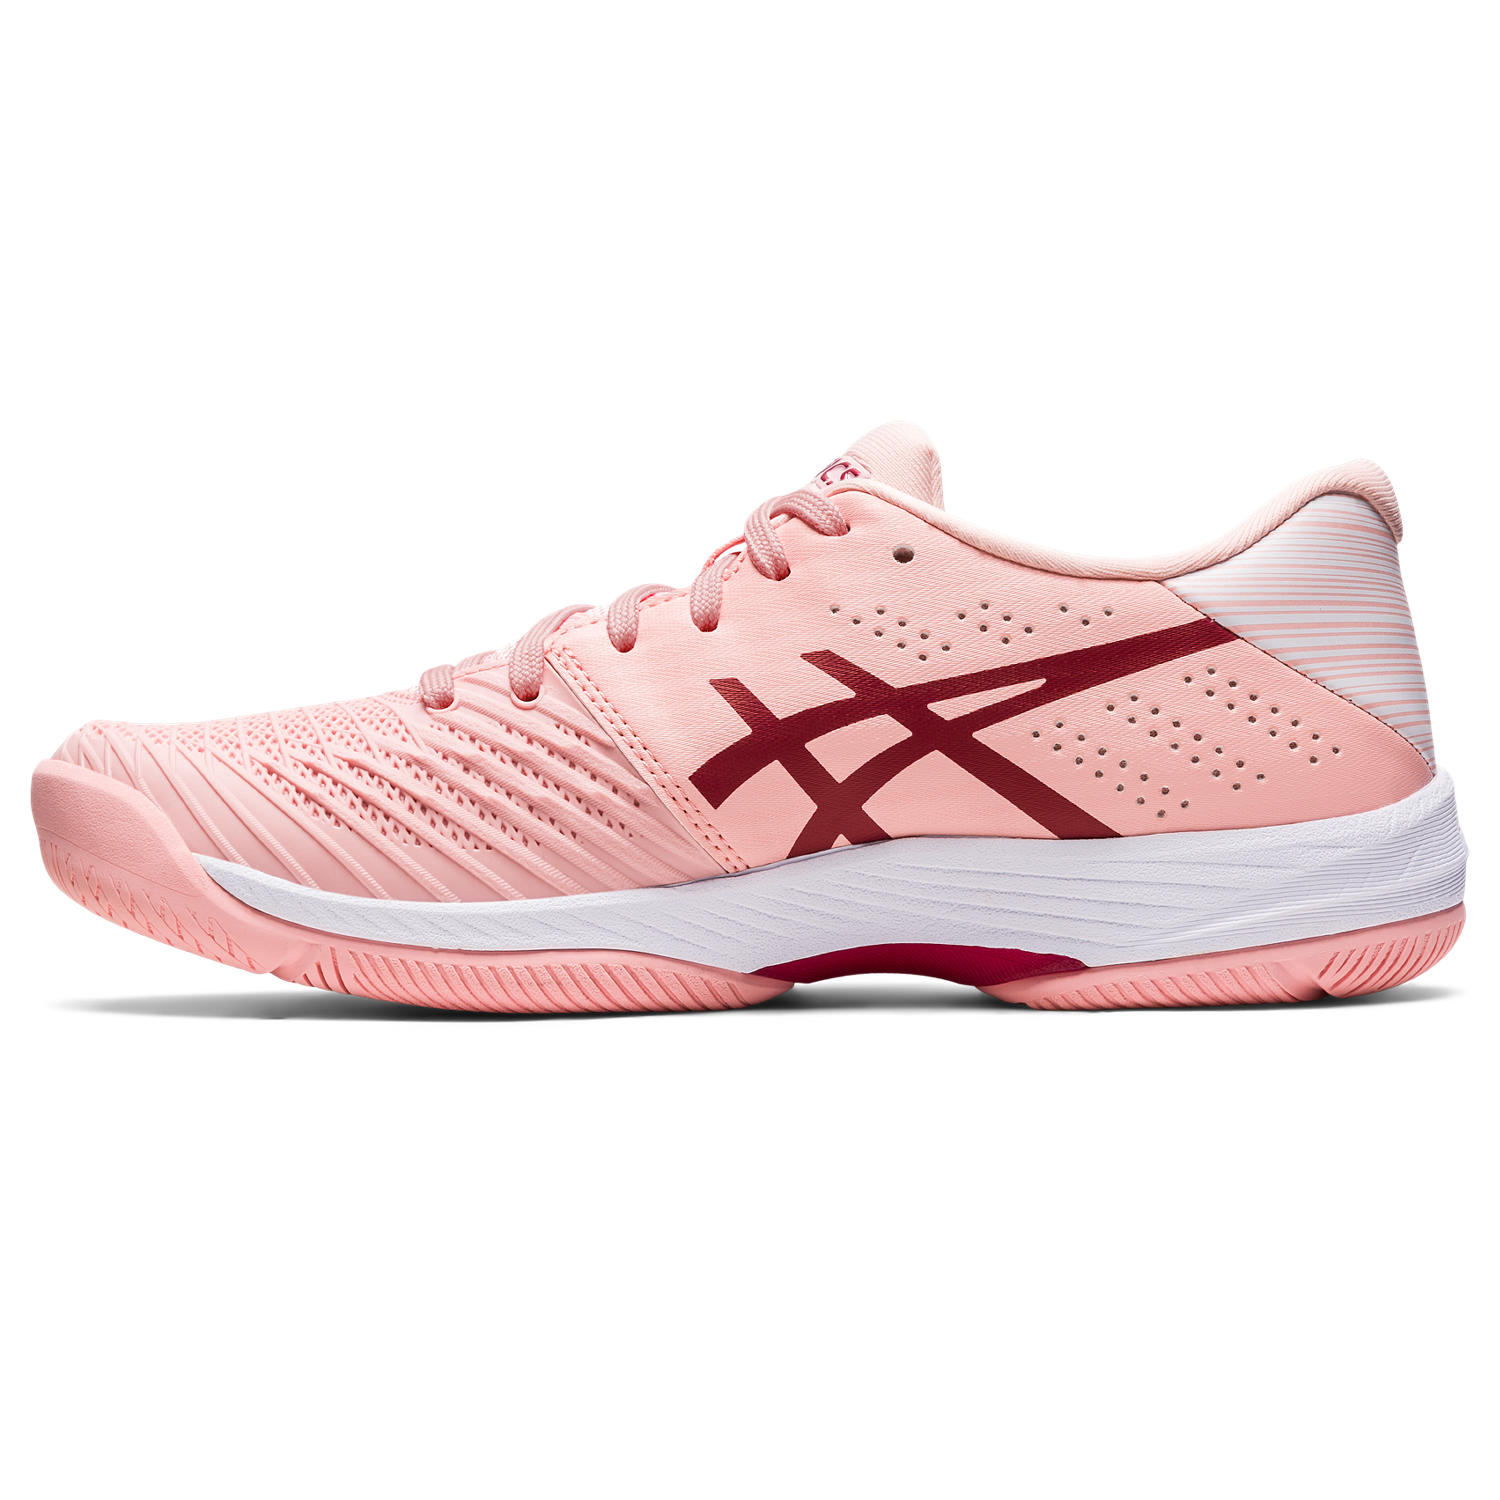 ASICS Shoes | ASICS Women’s Gel-Flux 4 Running Sneakers Shoes Pink Silver Tennis Size 8.5 Euc | Color: Pink/Silver | Size: 8.5 | Pm-81298310's Closet